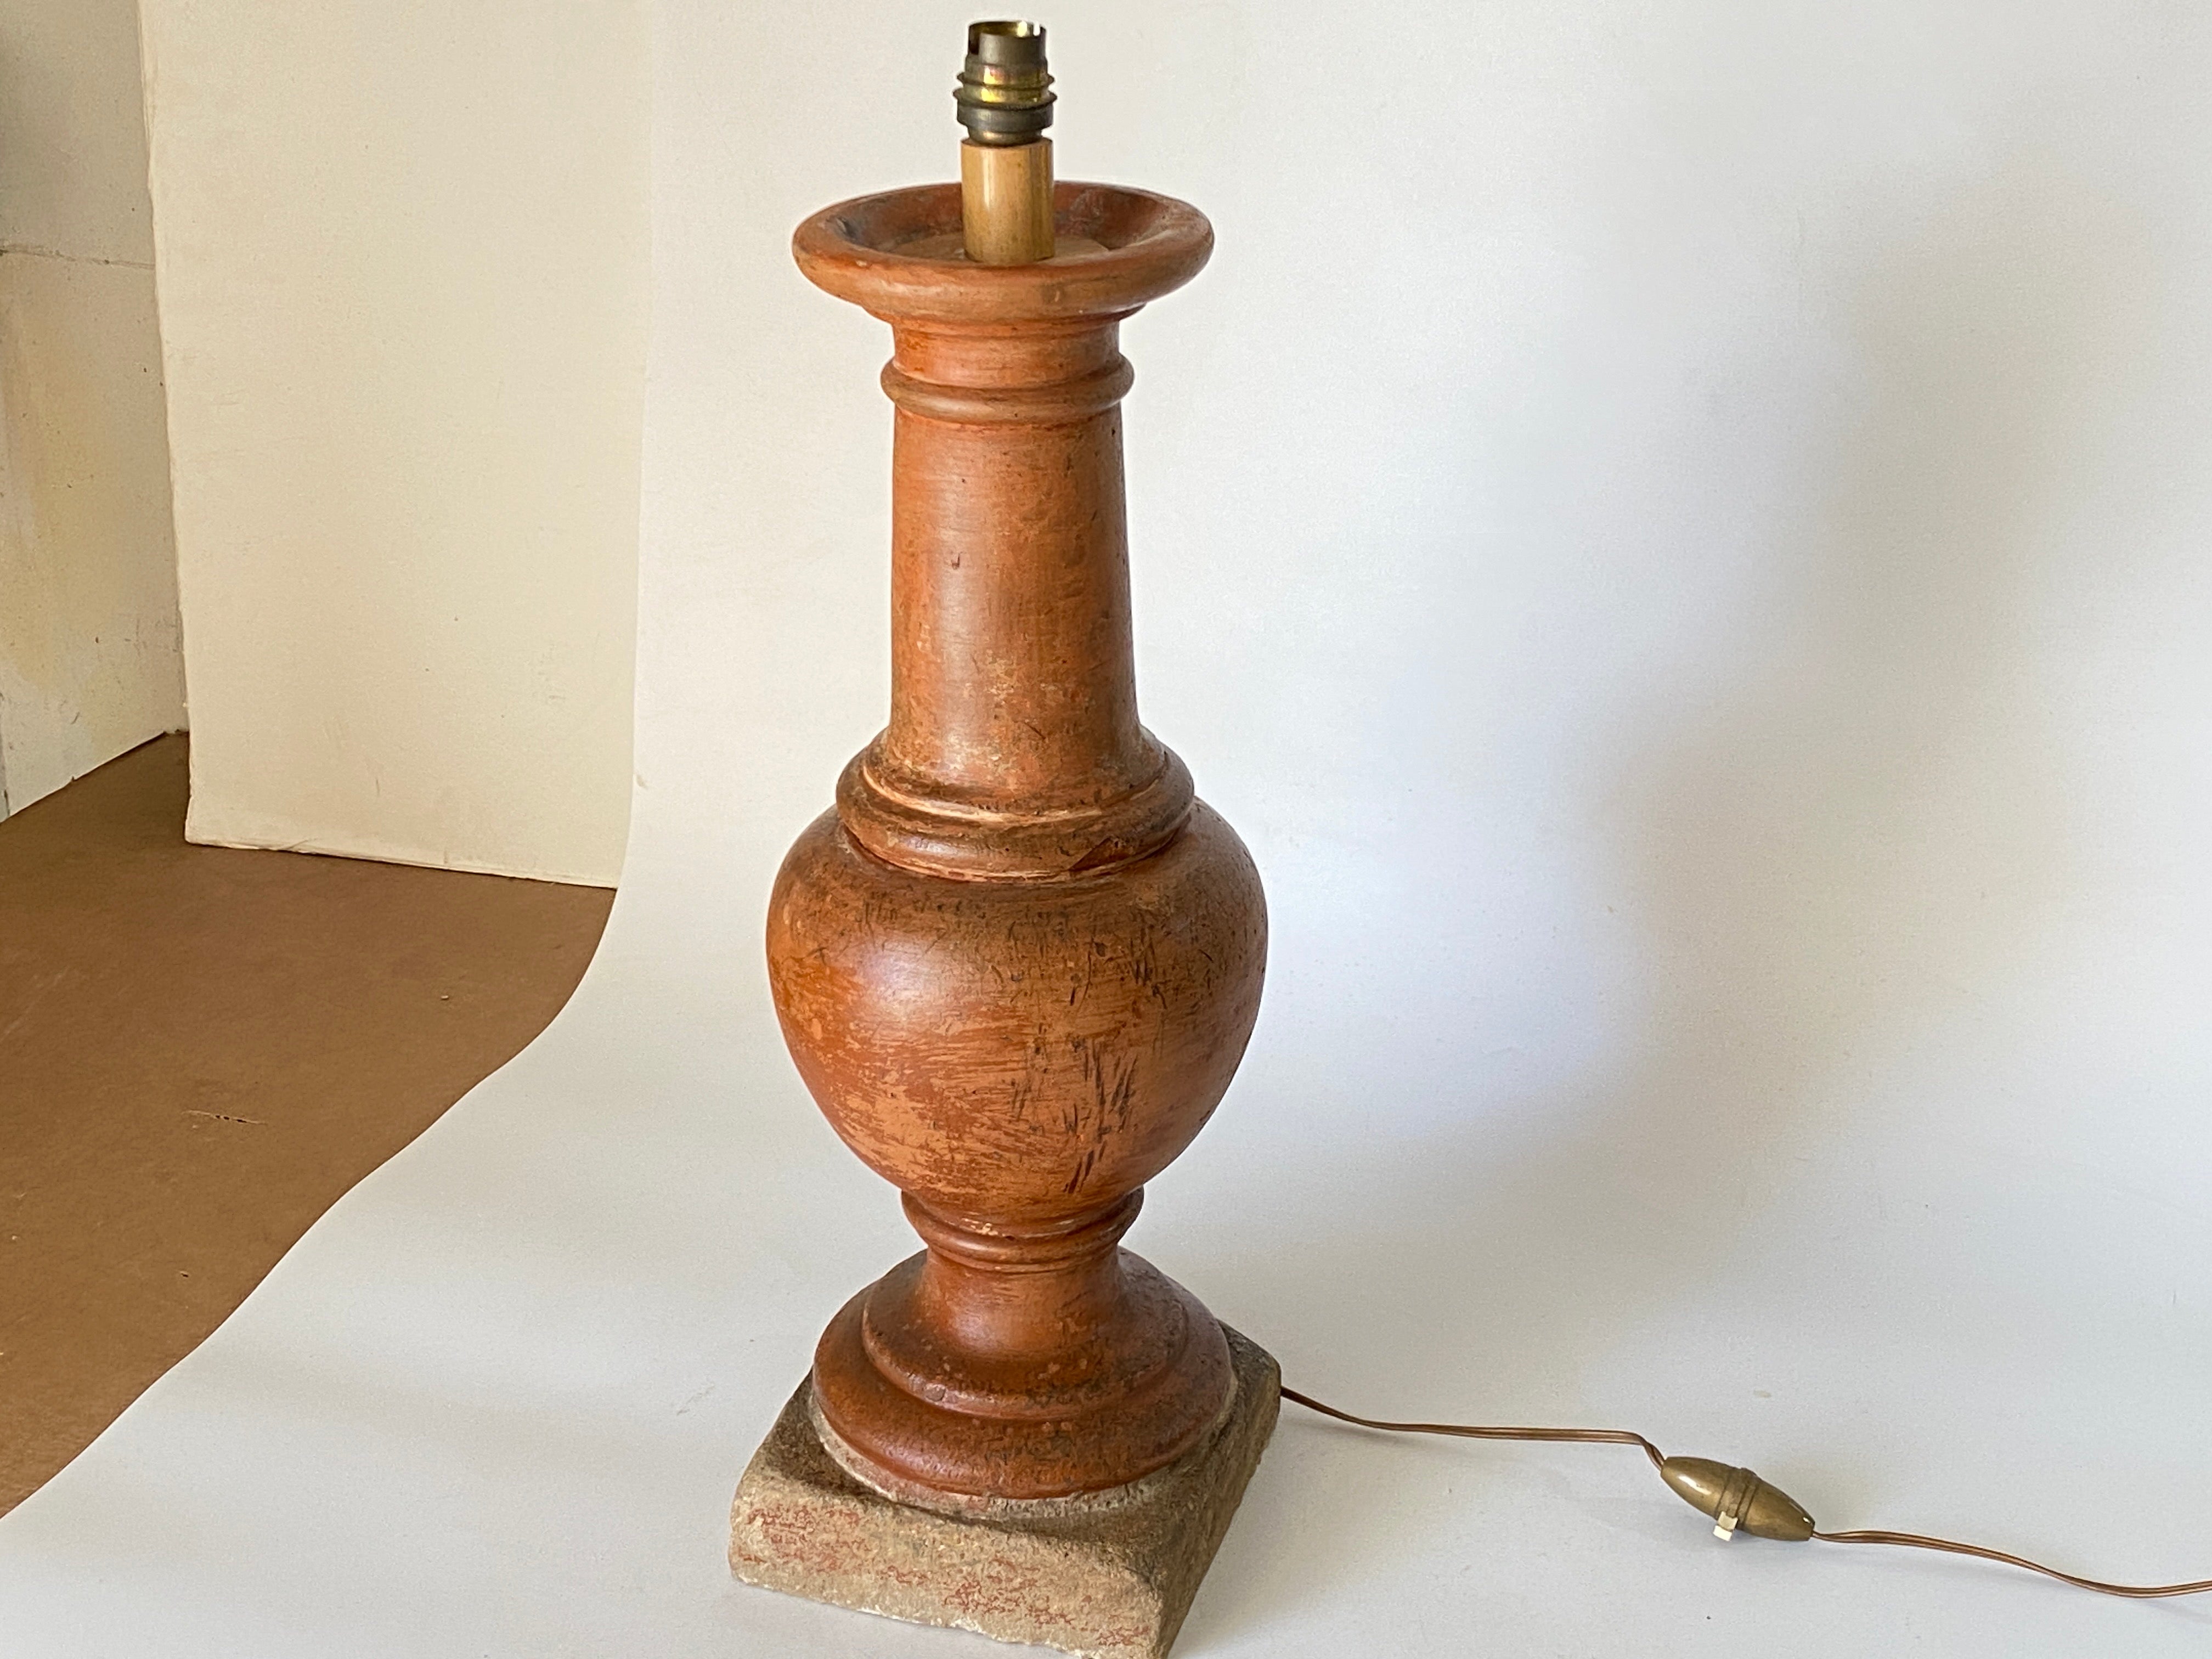 Tall French Neoclassical Terracotta Baluster Lamp, Brown Color, 19th Century For Sale 2